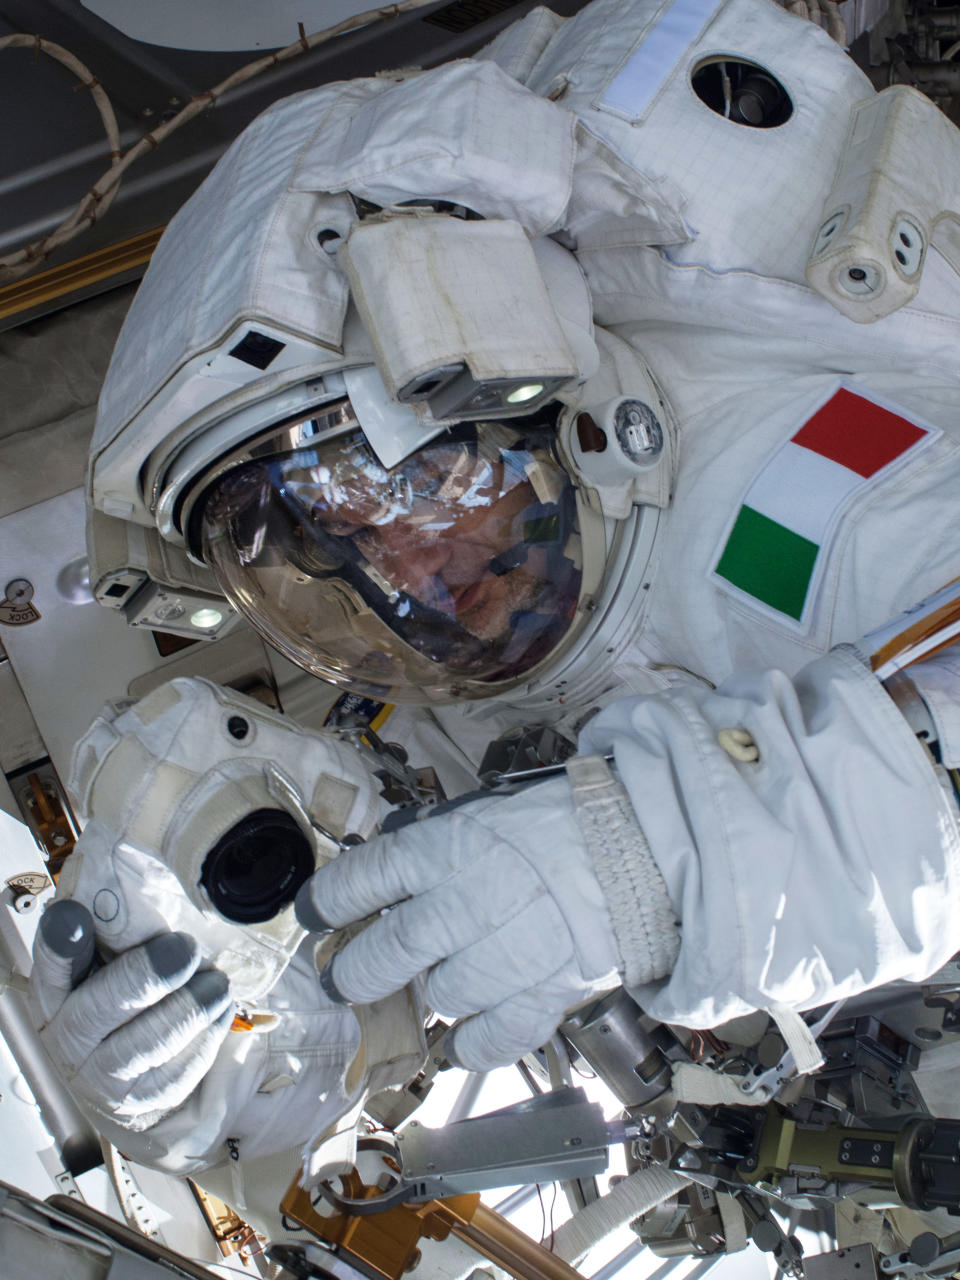 In this Tuesday, July 16, 2013 image provided by NASA, European Space Agency astronaut Luca Parmitano participates in a spacewalk outside the International Space Station. A final report issued Wedesday, Feb. 26, 2014 by NASA says it could have prevented the near-drowning of the spacewalking astronaut on July 16, 2013. According to the report, Parmitano's helmet had also leaked one week earlier at the end of his first spacewalk. The report says the space station team misdiagnosed the first failure and should have delayed the second spacewalk until the problem was understood. (AP Photo/NASA)